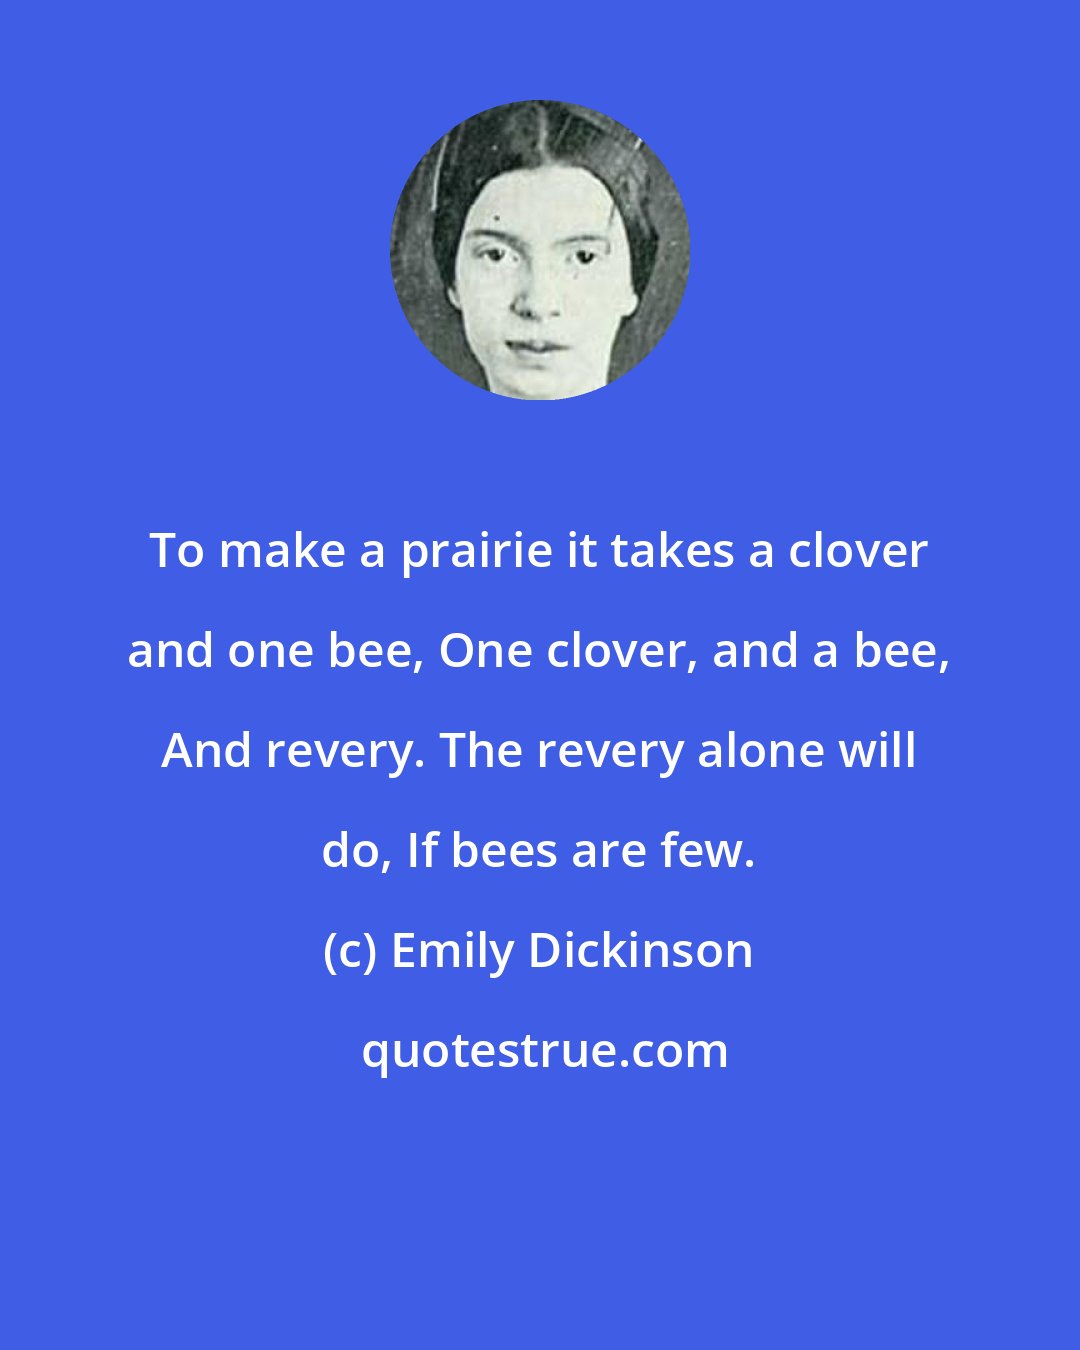 Emily Dickinson: To make a prairie it takes a clover and one bee, One clover, and a bee, And revery. The revery alone will do, If bees are few.